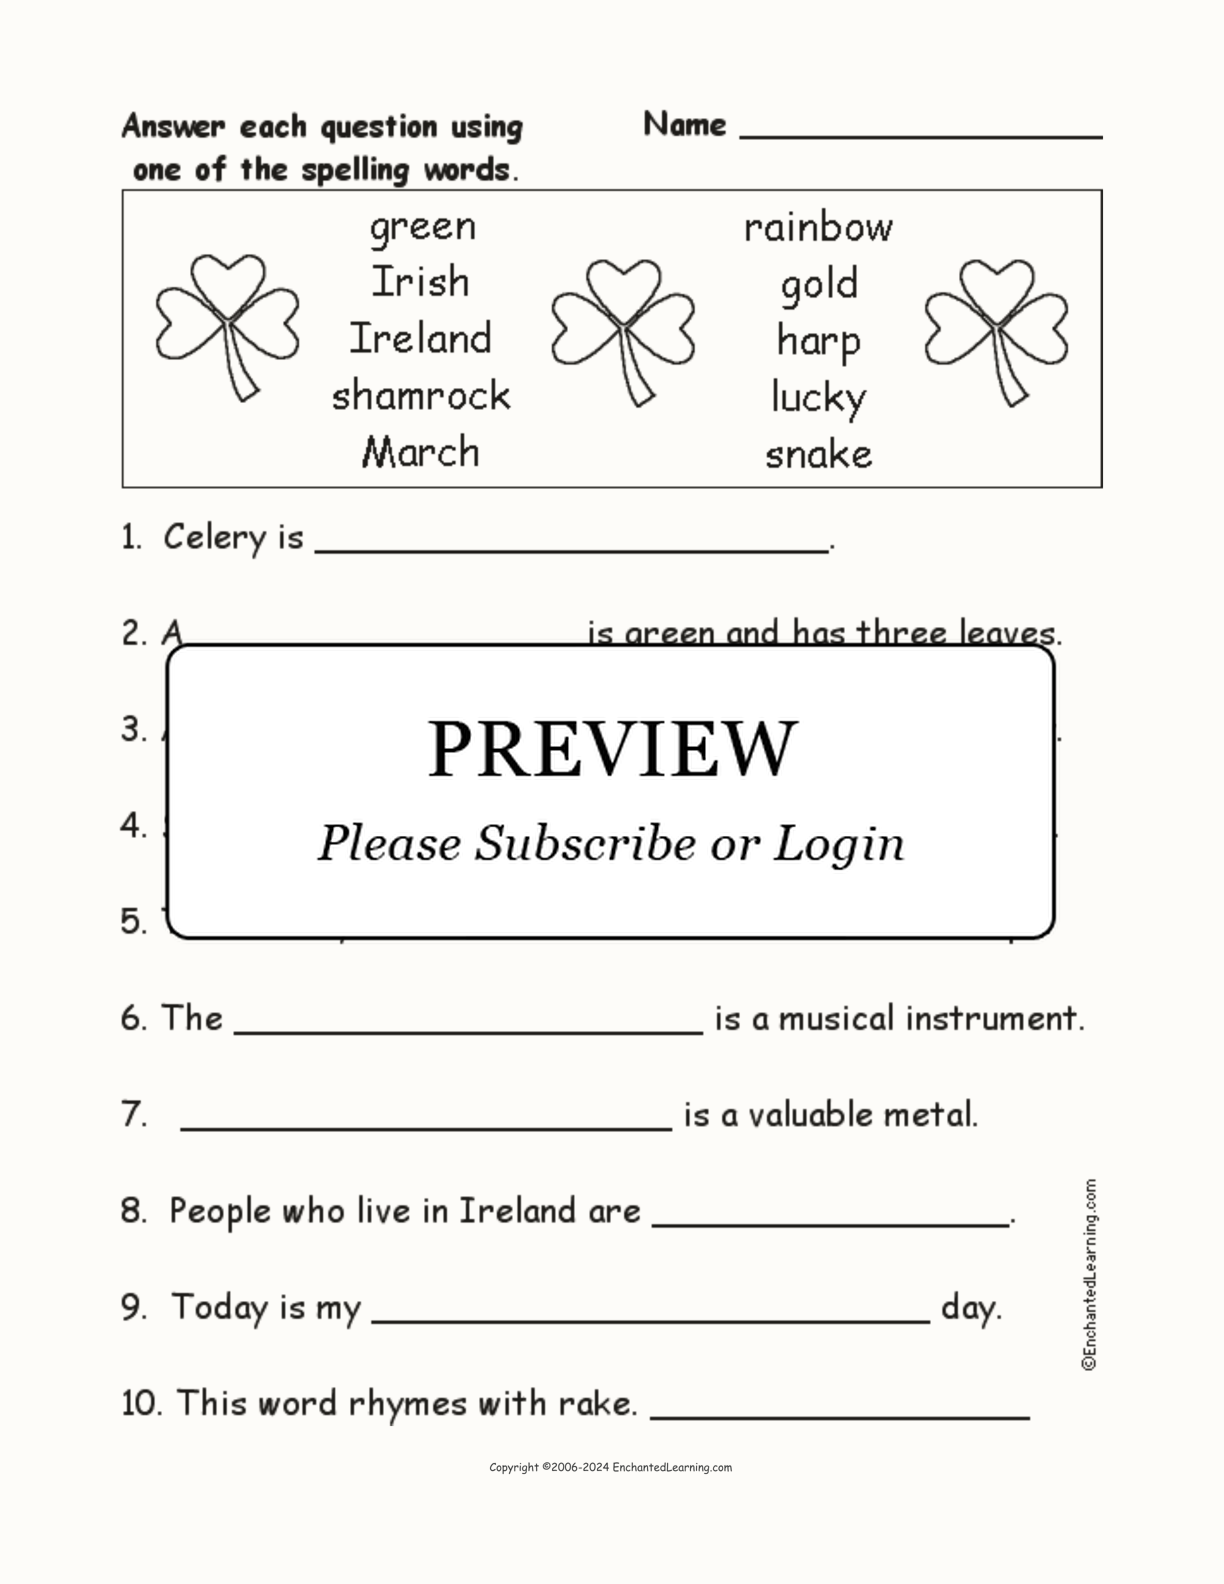 St. Patrick's Day Spelling Word Questions interactive worksheet page 1